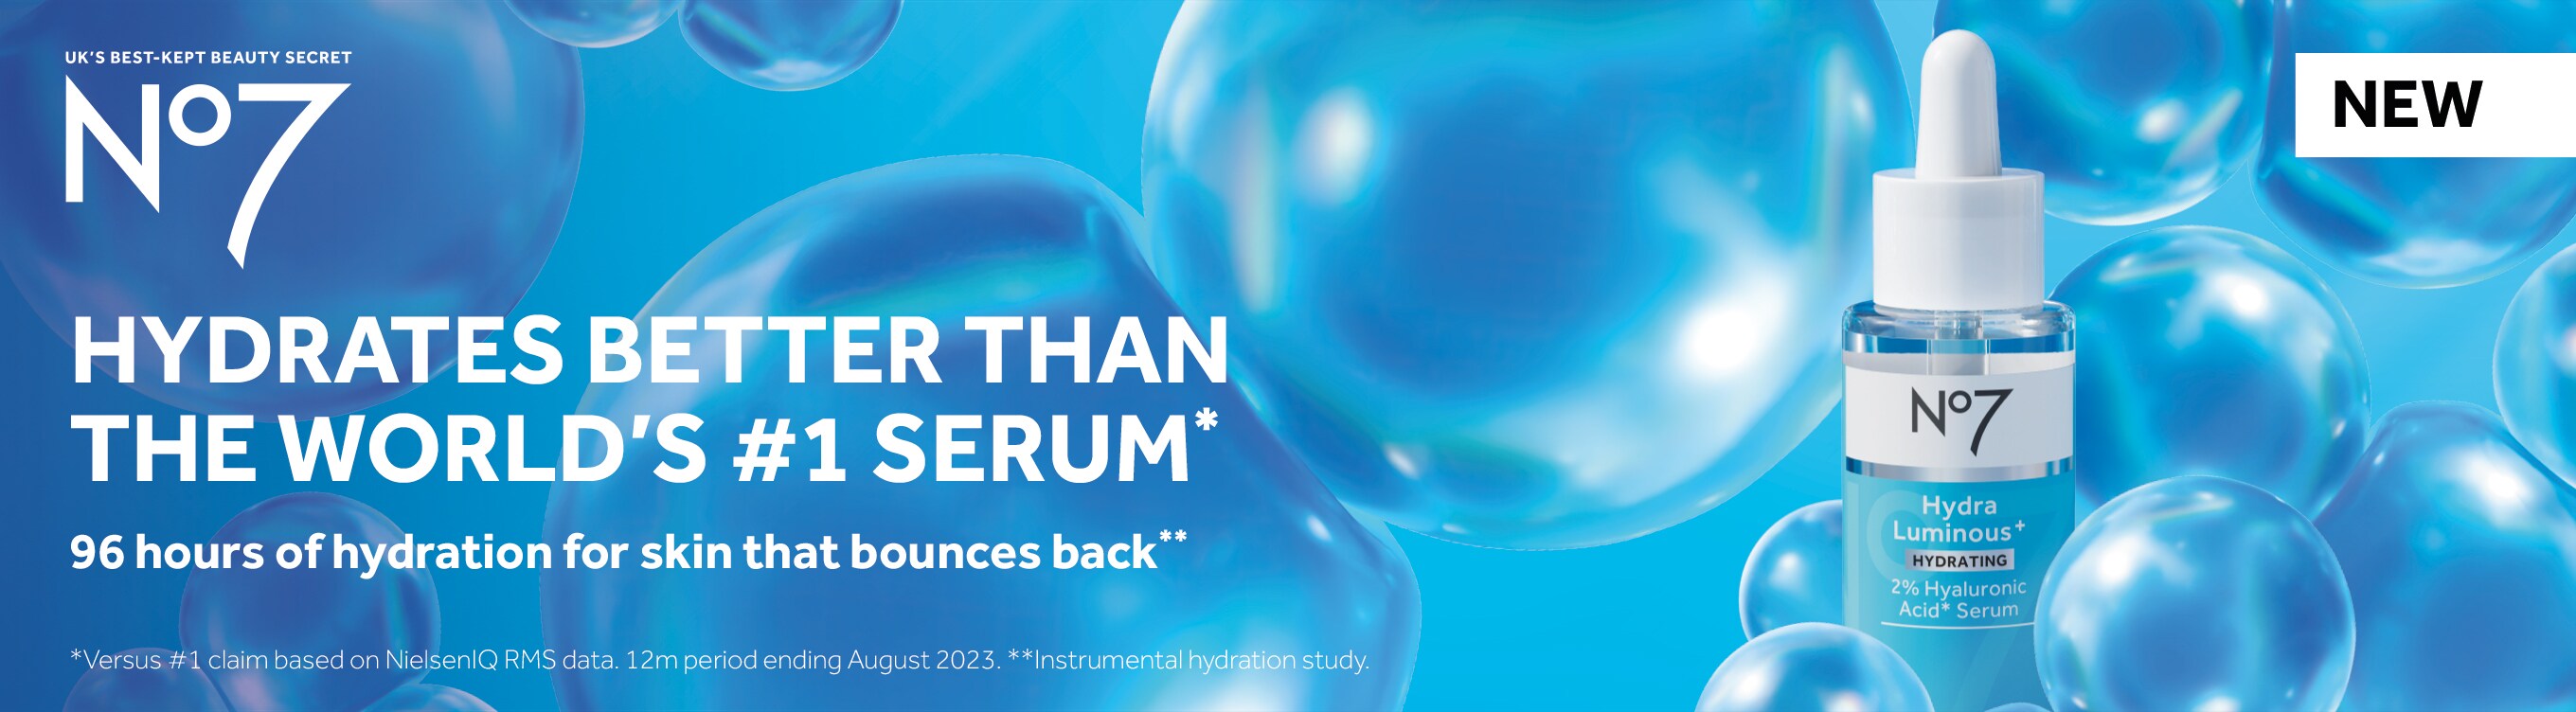 NEW. UK's best kept beauty secret. No7. Hydrates better than the world's #1 serum.* 96 hours of hydration for skin that bounces back.** * Verses#1 claim based on NielsenIQ RMS data. 12m period ending August 2023. **Instrumental hydration study.